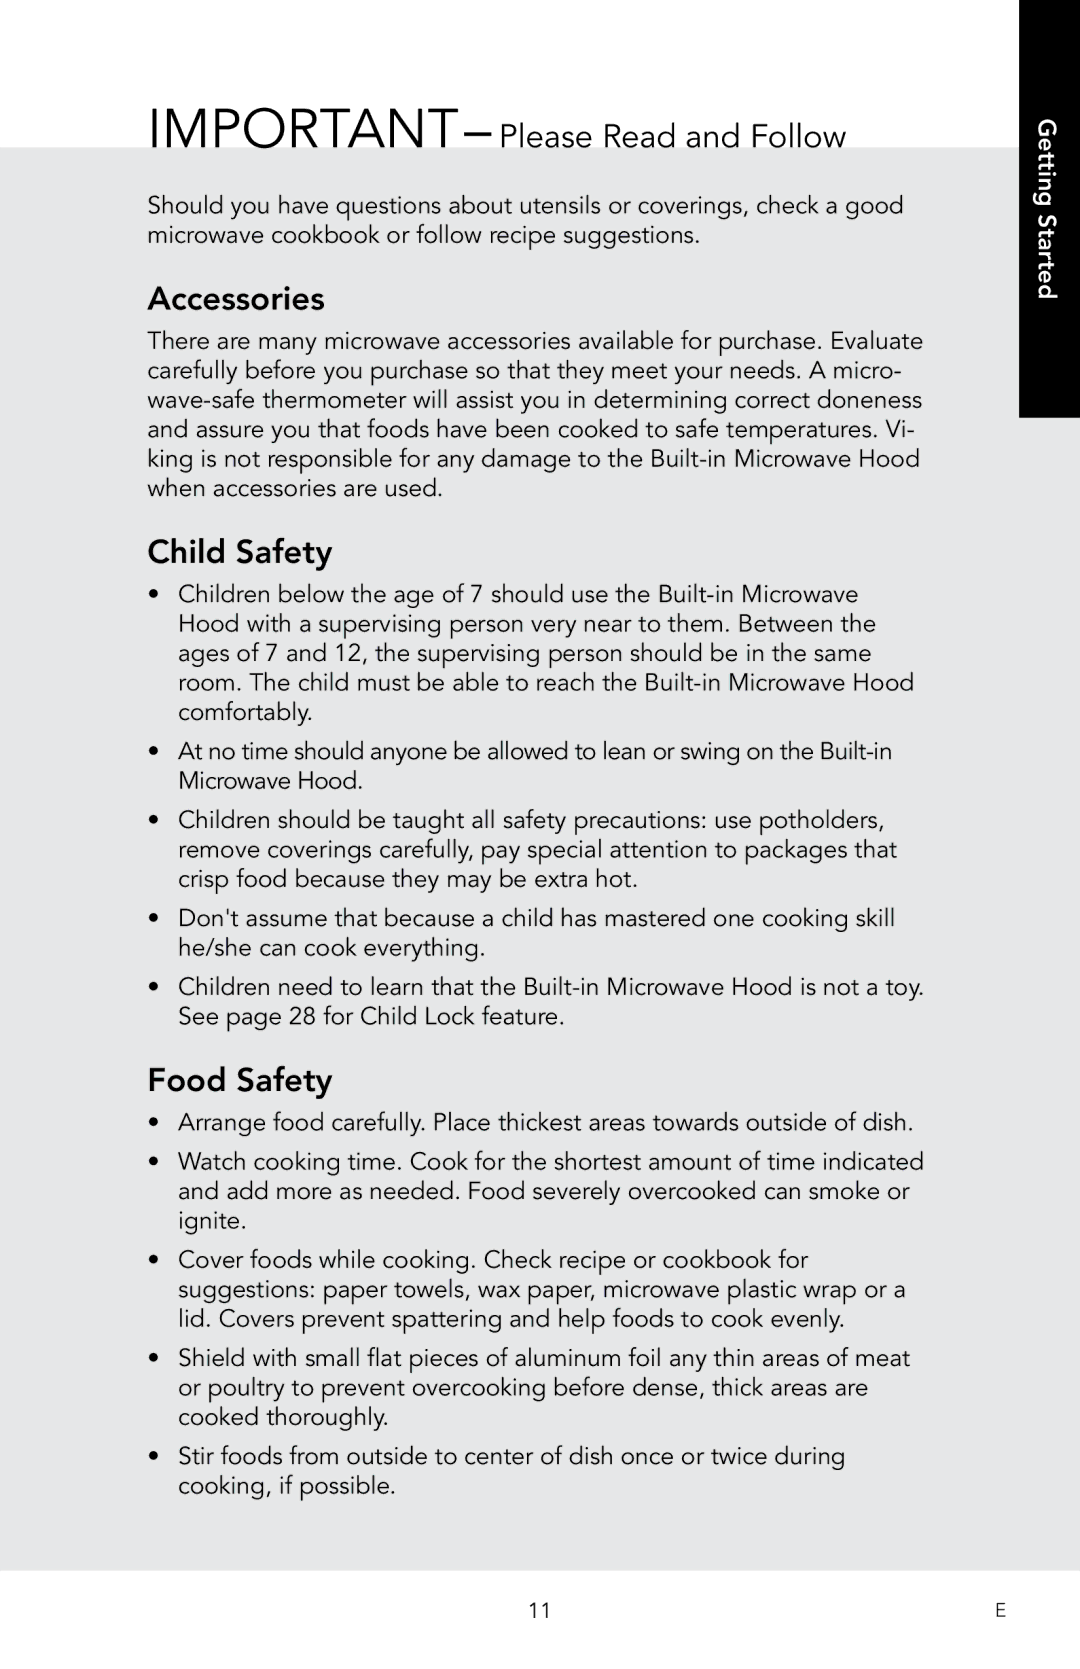 Viking F20974 manual Accessories, Child Safety, Food Safety 